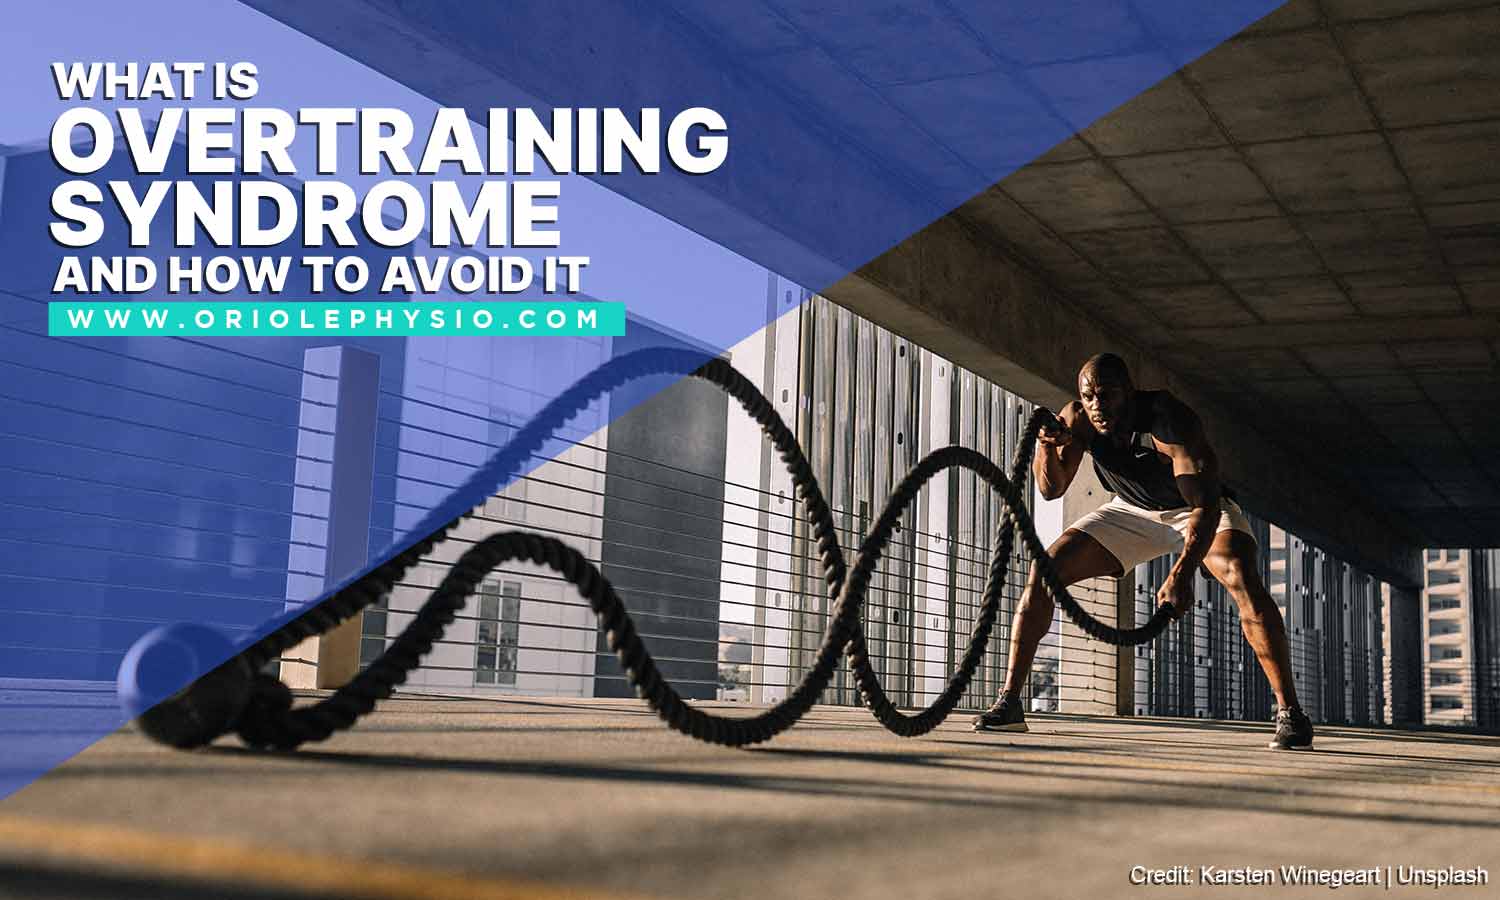 What Is Overtraining Syndrome and How to Avoid It